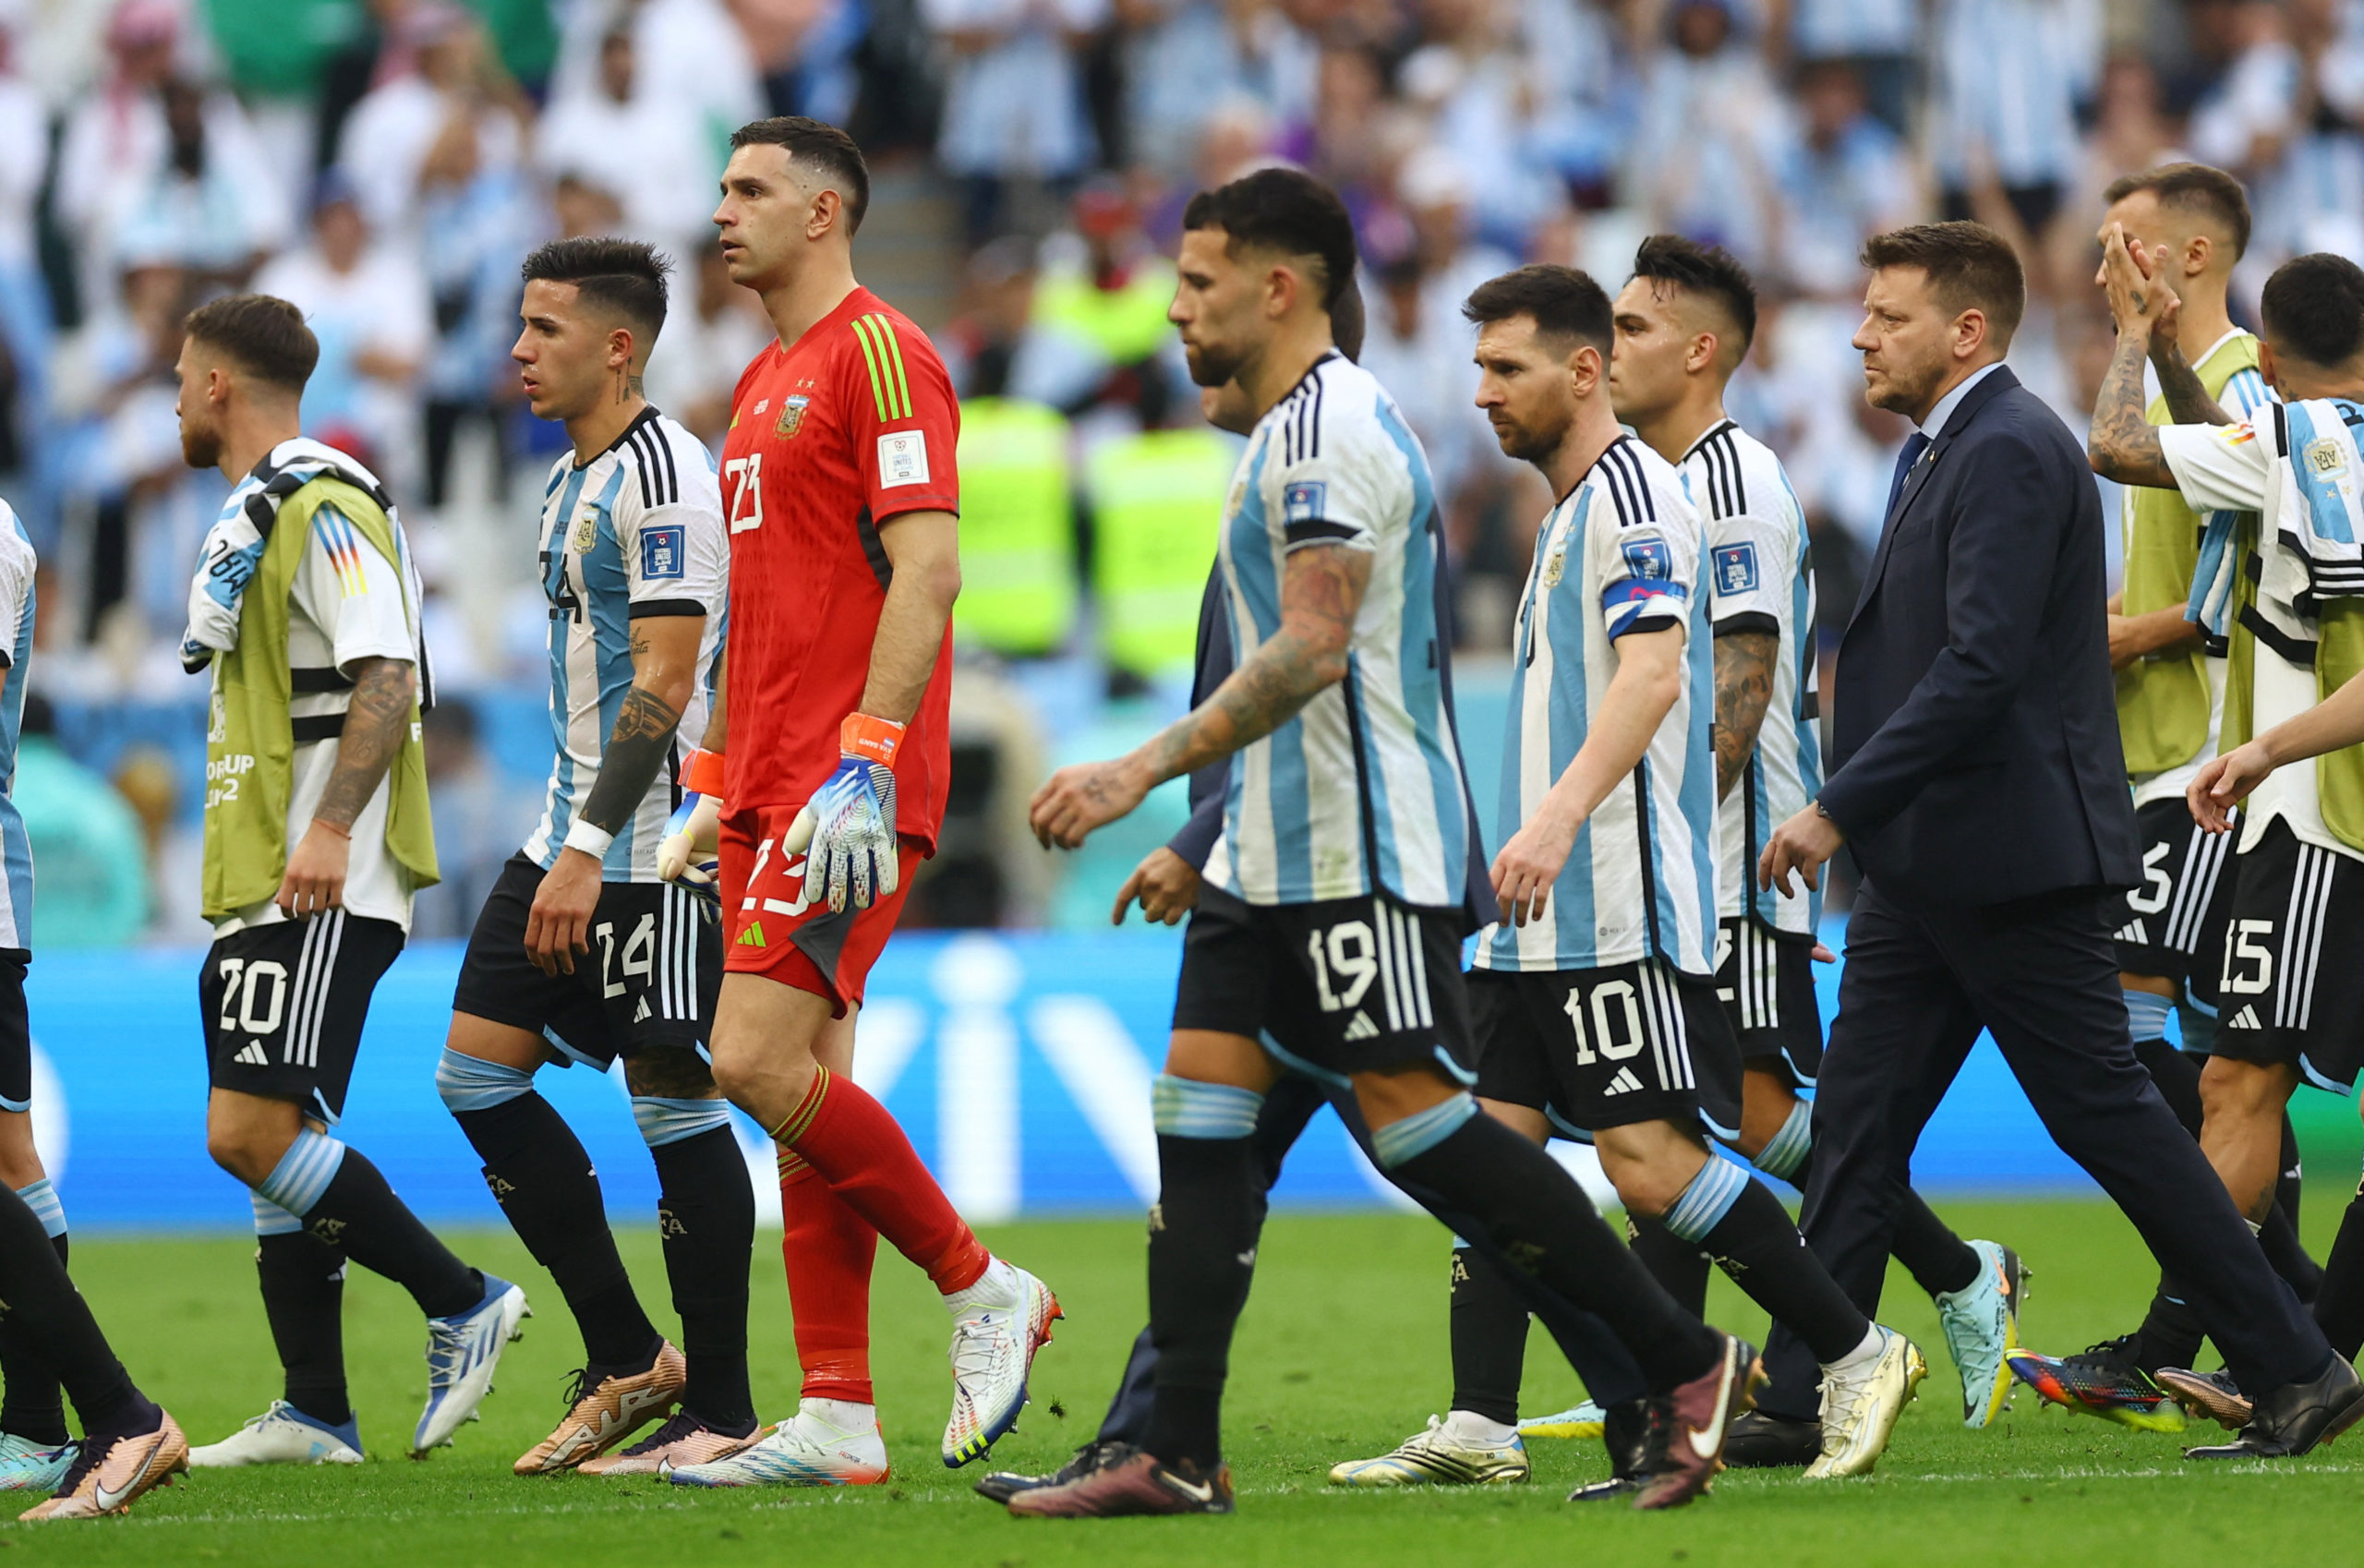 Soccer Football - FIFA World Cup Qatar 2022 - Group C - Argentina v Saudi Arabia - Lusail Stadium, Lusail, Qatar - November 22, 2022 Argentina's Lionel Messi and teammates look dejected after the match 